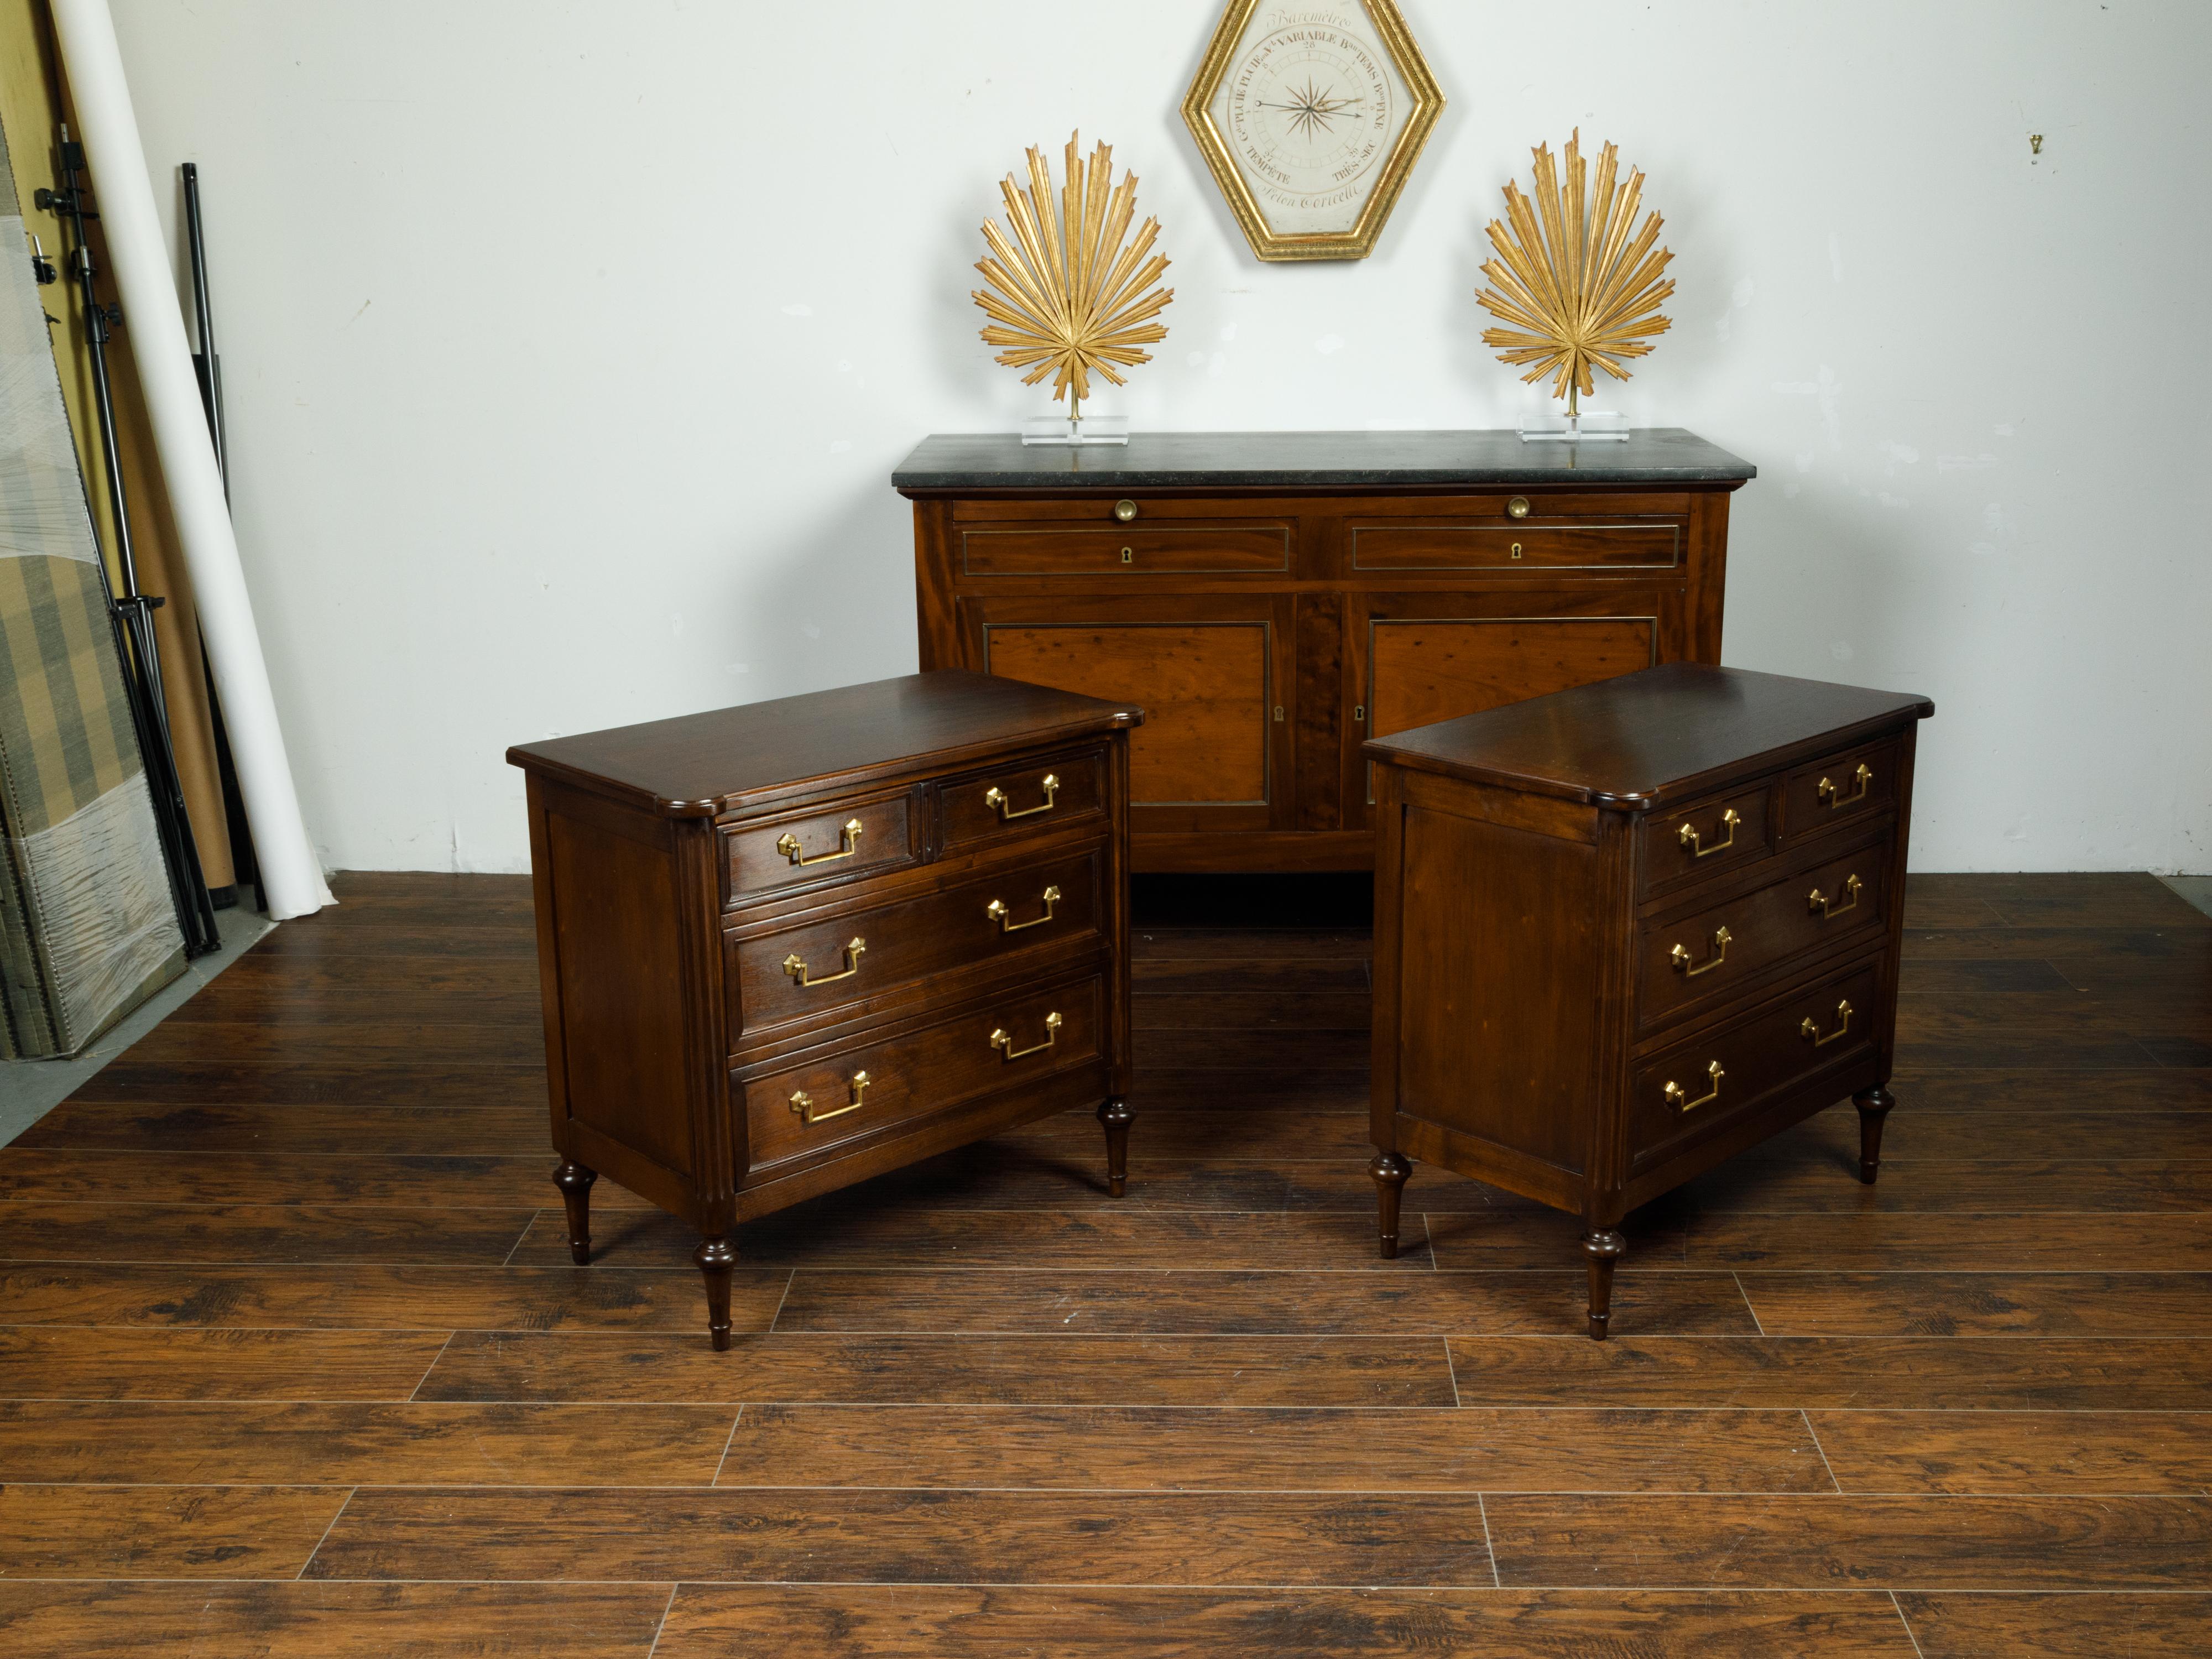 A pair of English mahogany commodes from the mid 20th century, with four drawers, brass hardware and fluted side posts. Created in England during the mid 20th century, each of this pair of commodes features a rectangular top with rounded protruding